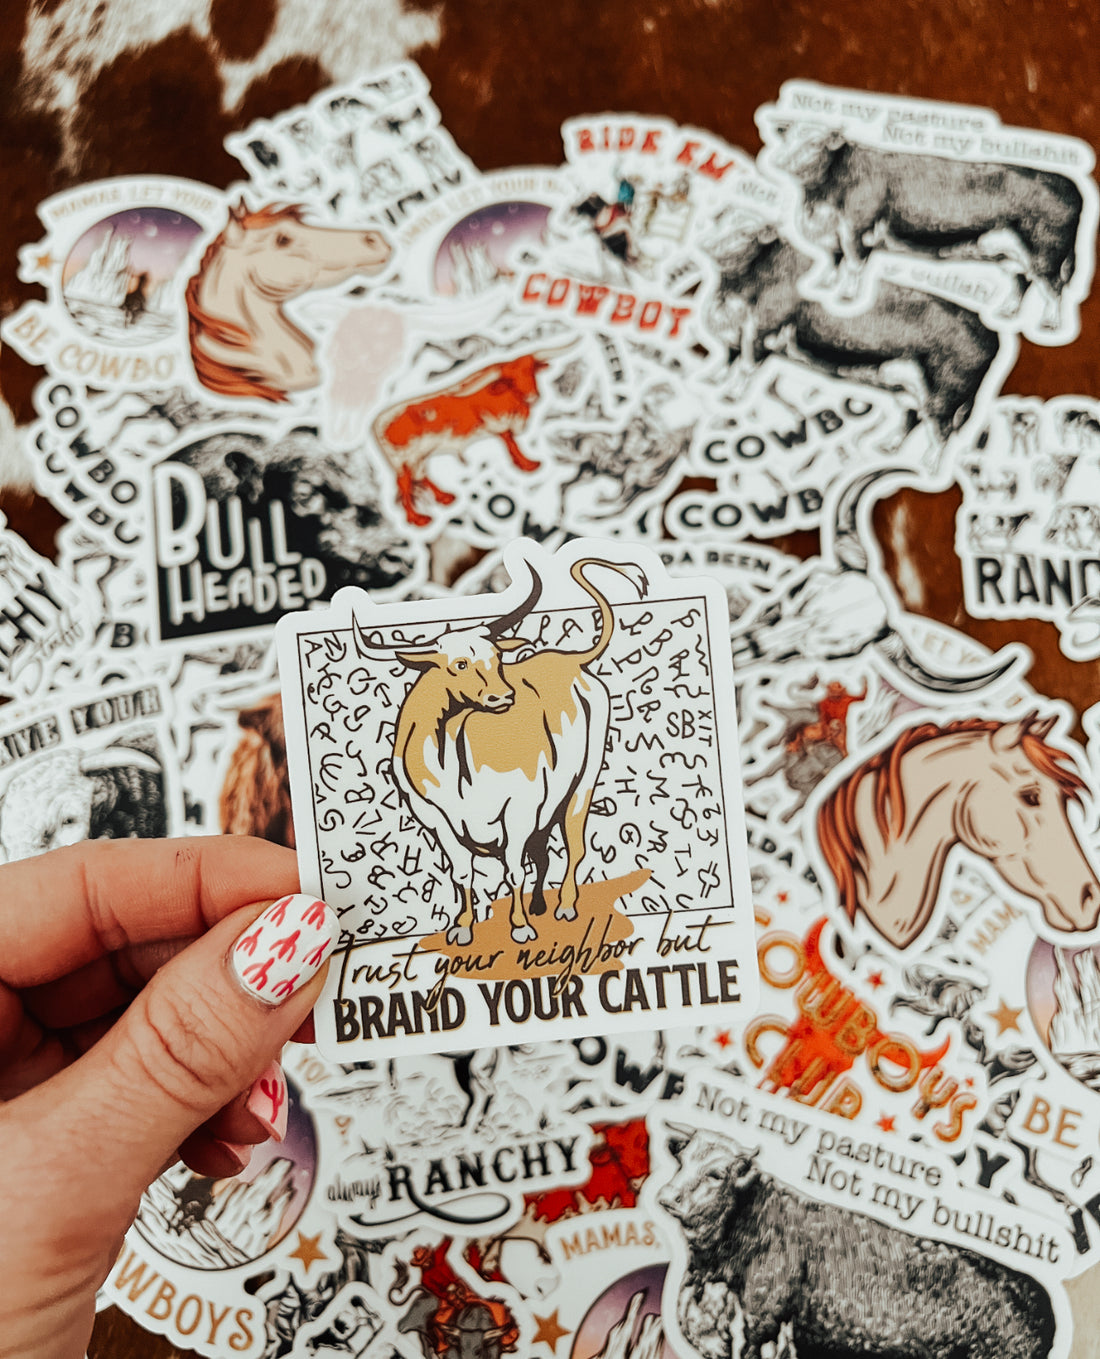 Trusts Your Neighbor, But Brand You Cattle Sticker